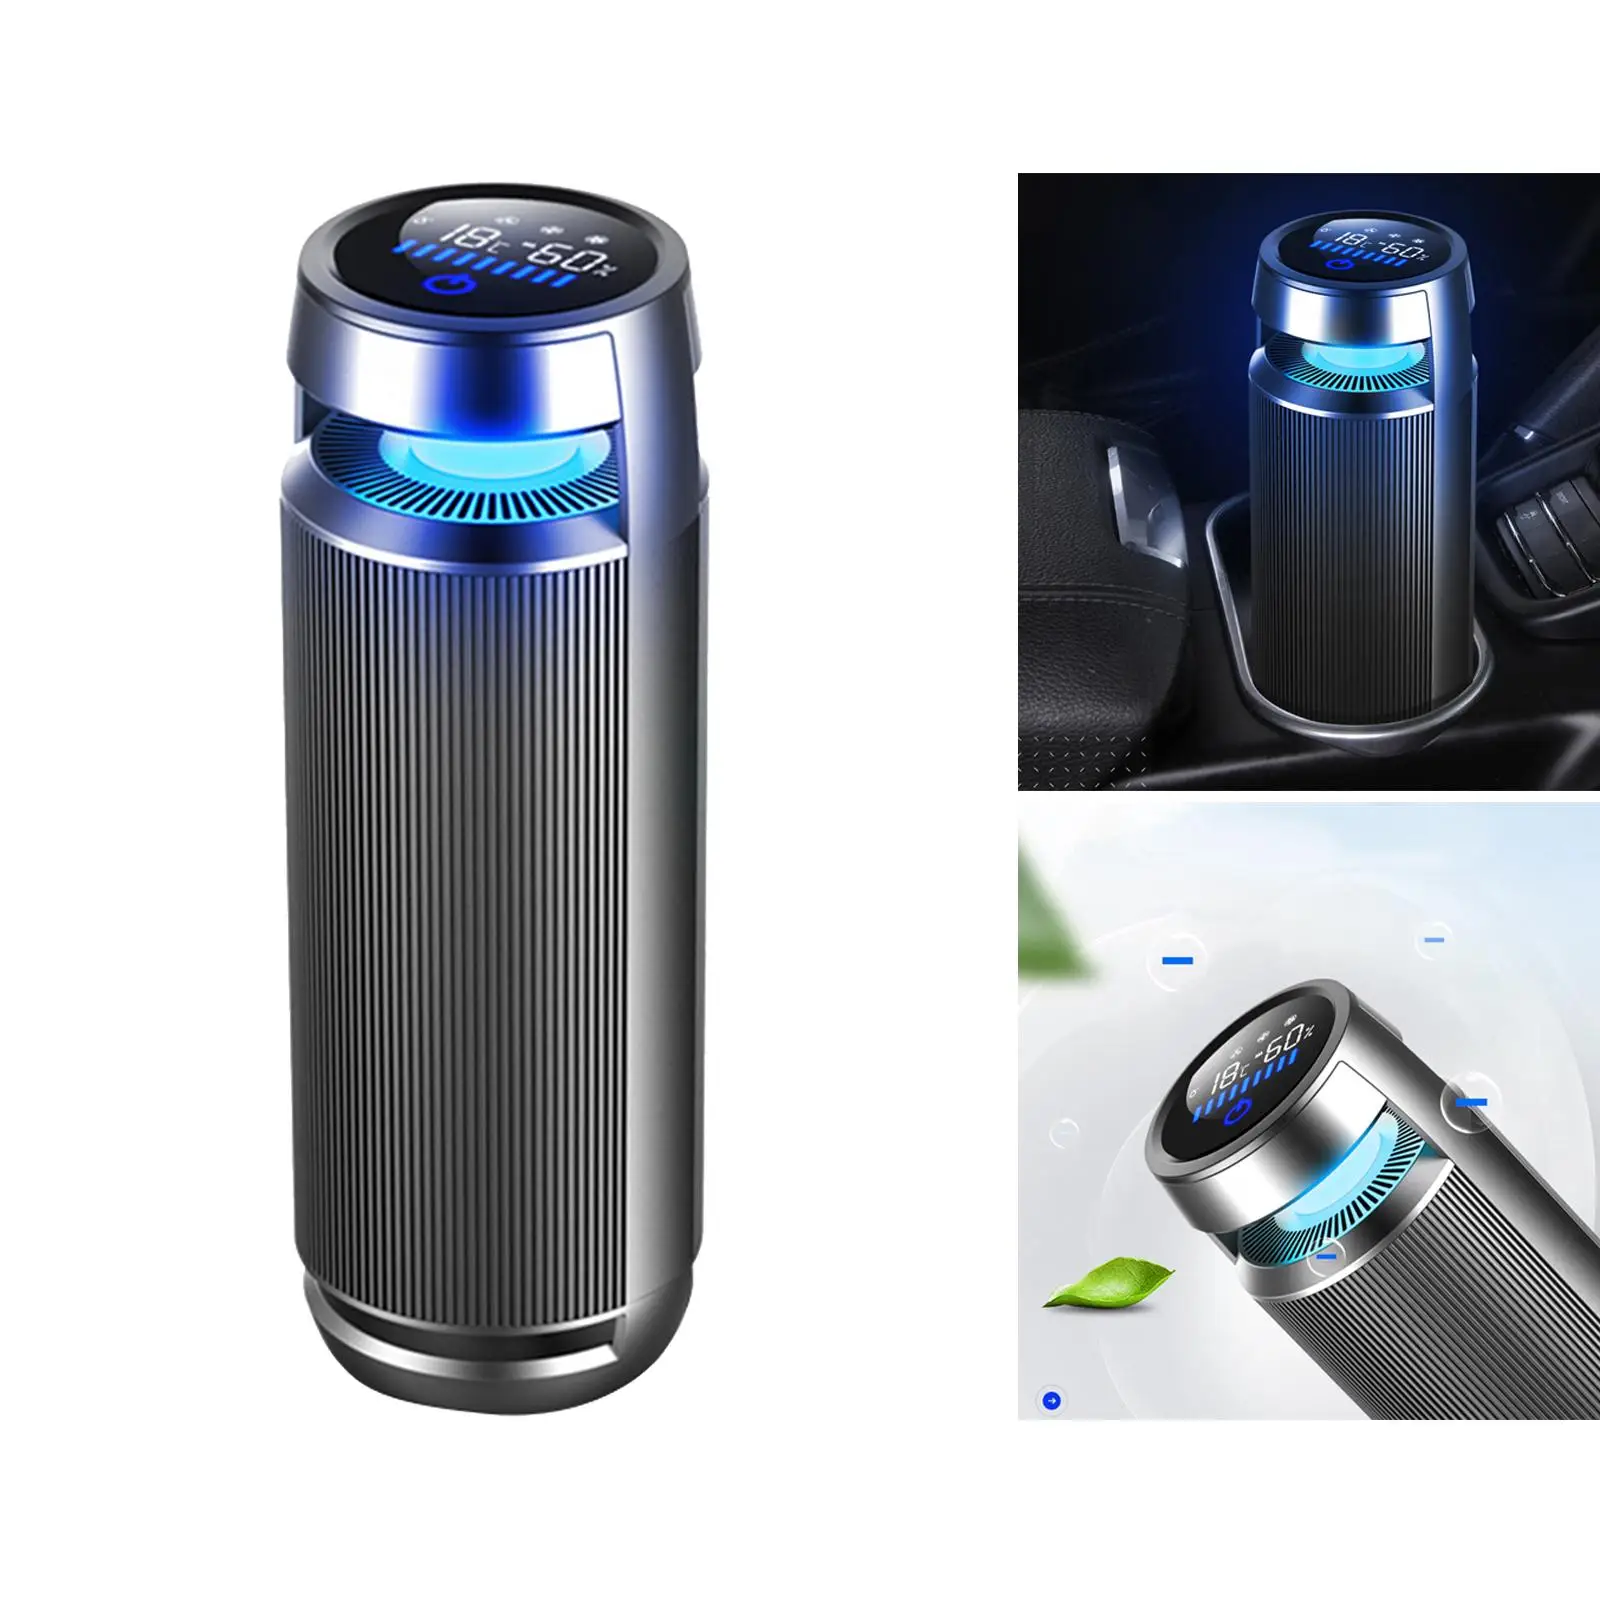 Portable   Filter, Fresh , Purifying Support for Home, Office, Car, or Travel, Removes Pollen, Smoke, Odors, USB Powered